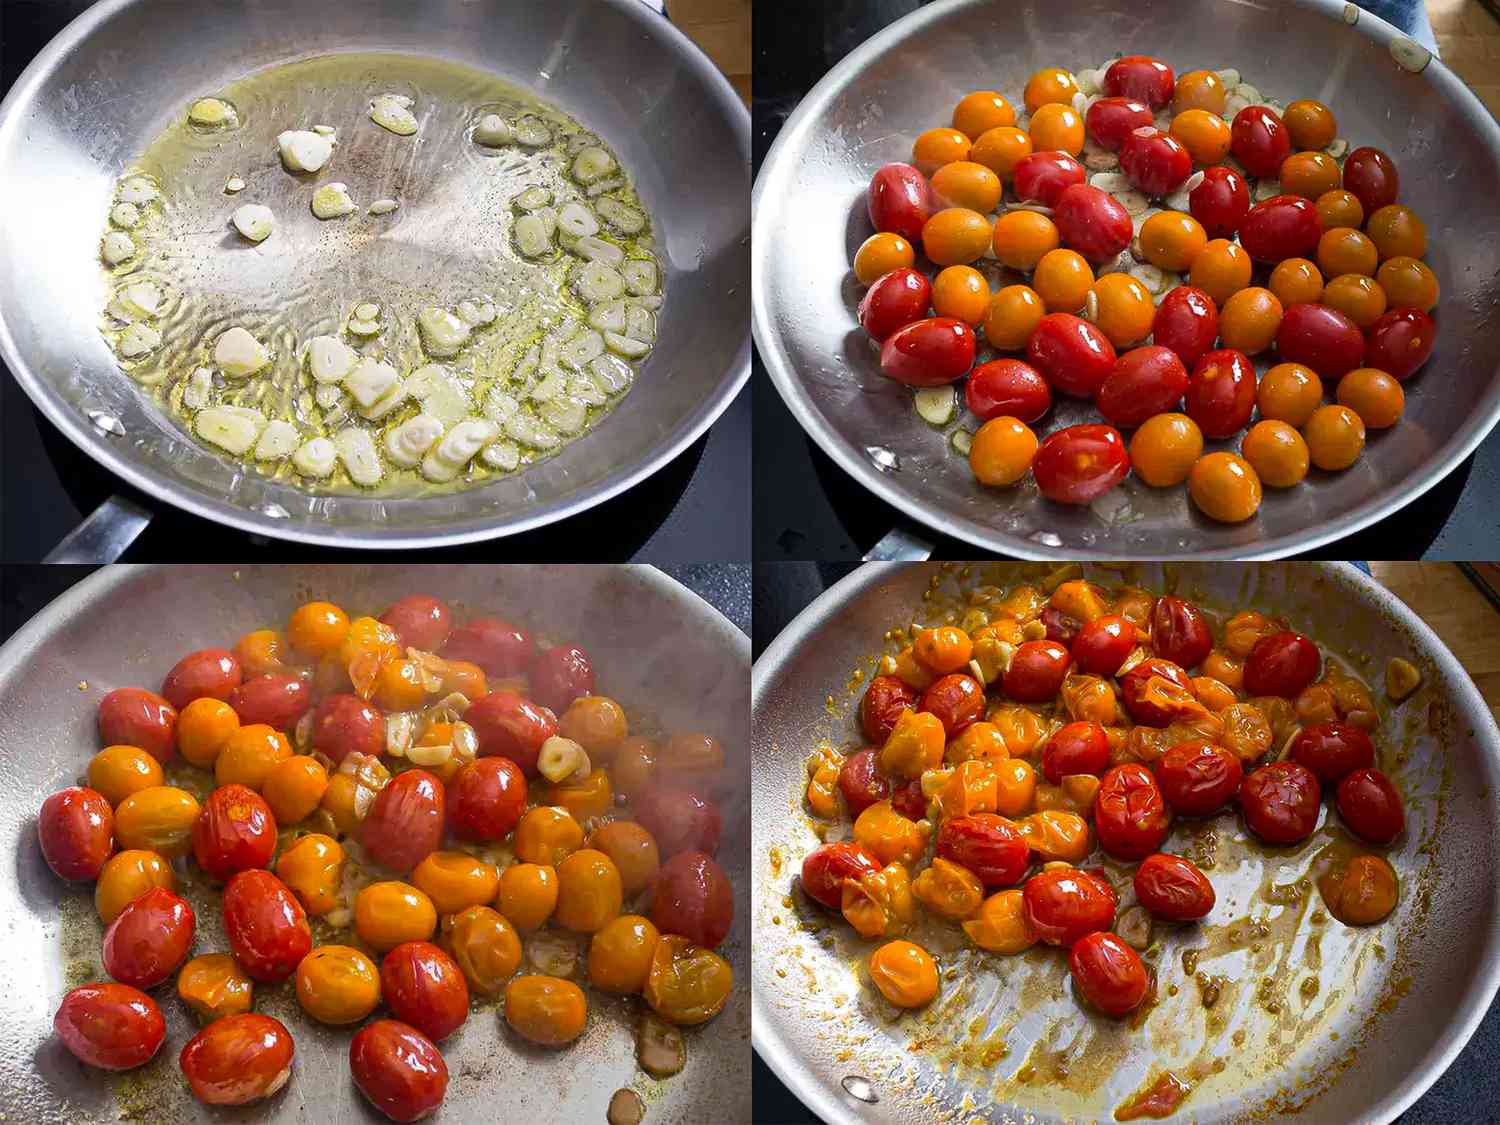 A four-image collage showing the tomato sauce being made. The top left image shows sliced garlic and hot olive oil in a stainless steep pan. The top right image shows cherry tomatoes added to the pan whole. The bottom left image shows the cherry tomatoes being tossed and starting to break open. The bottom right image shows the cherry tomatoes now fully breaking down so that a sauce is forming from the liquid being released.